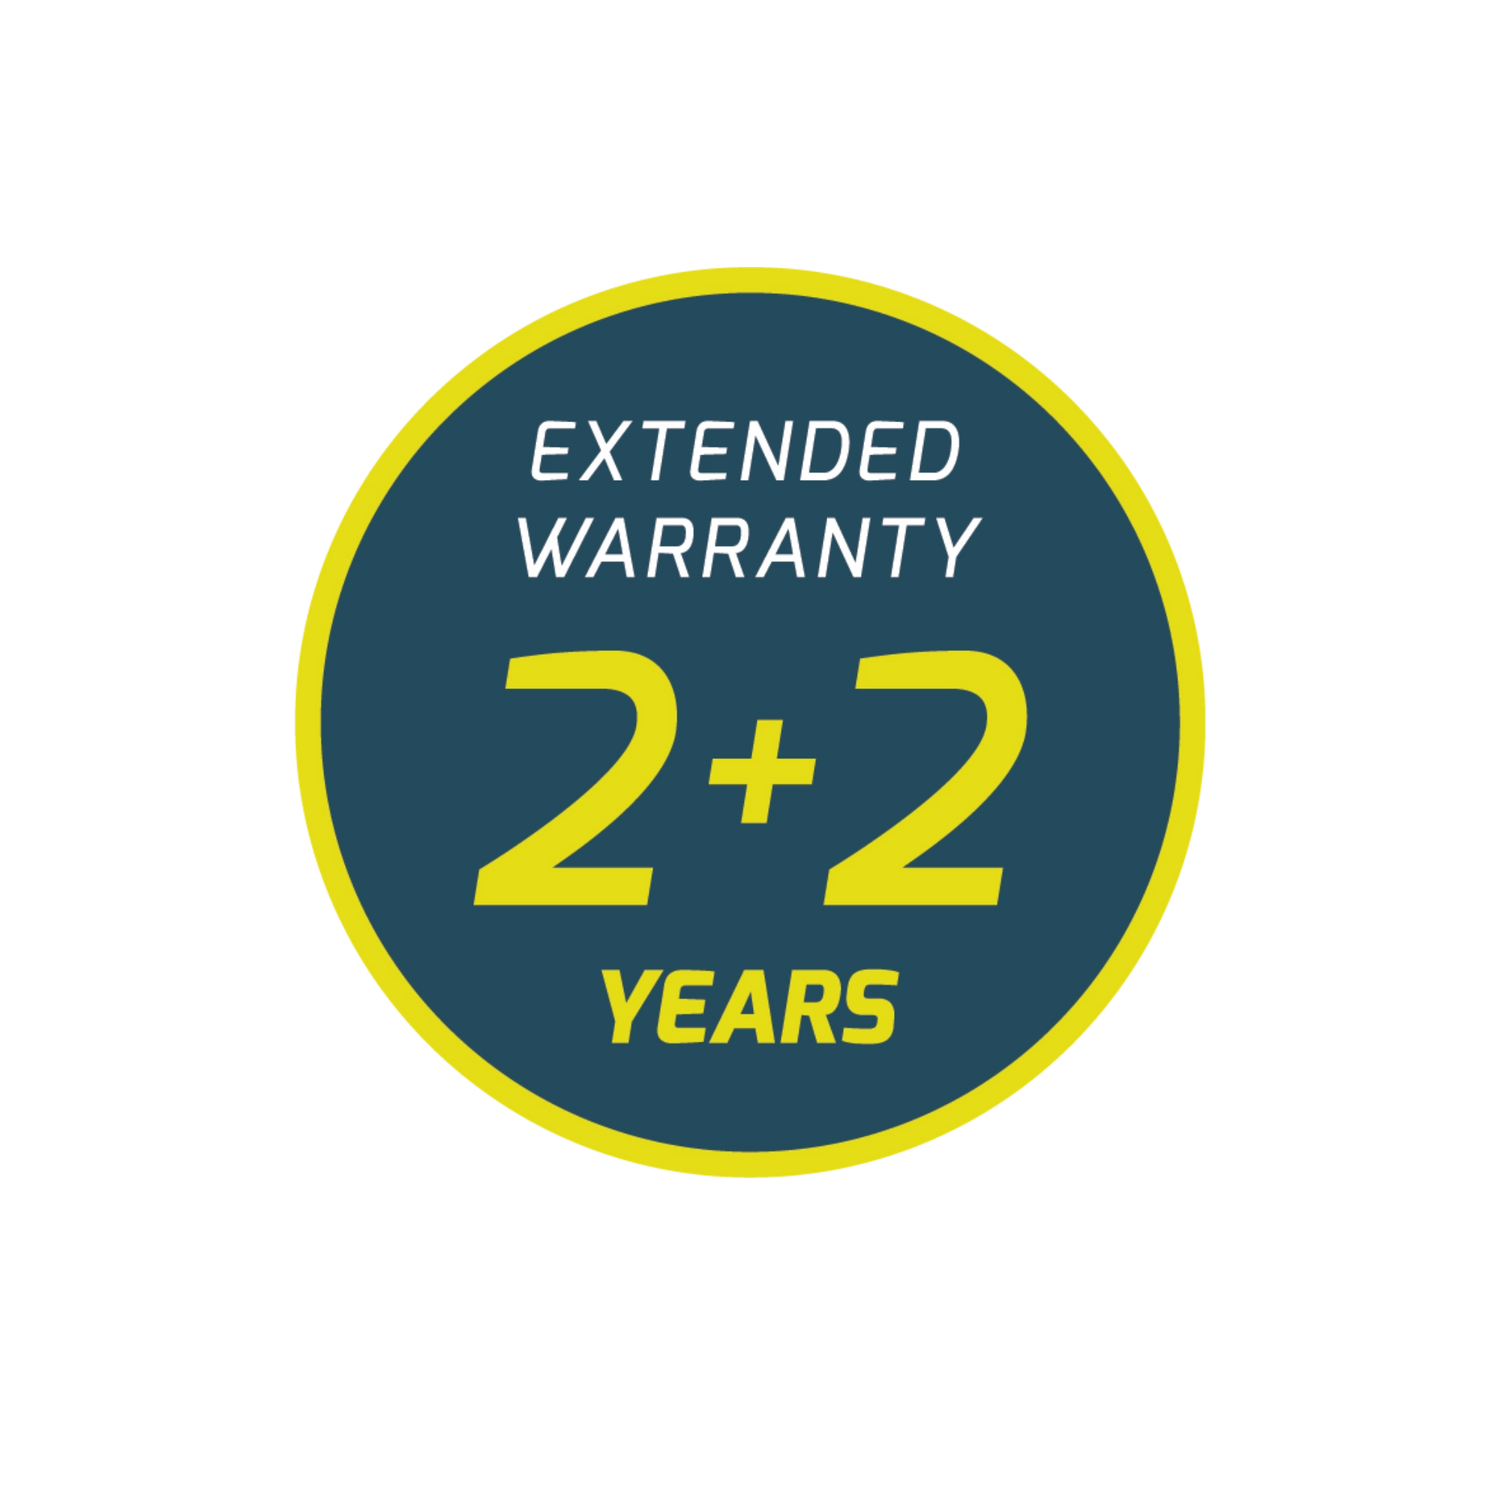 Ionmax extended 2+2 years warranty logo